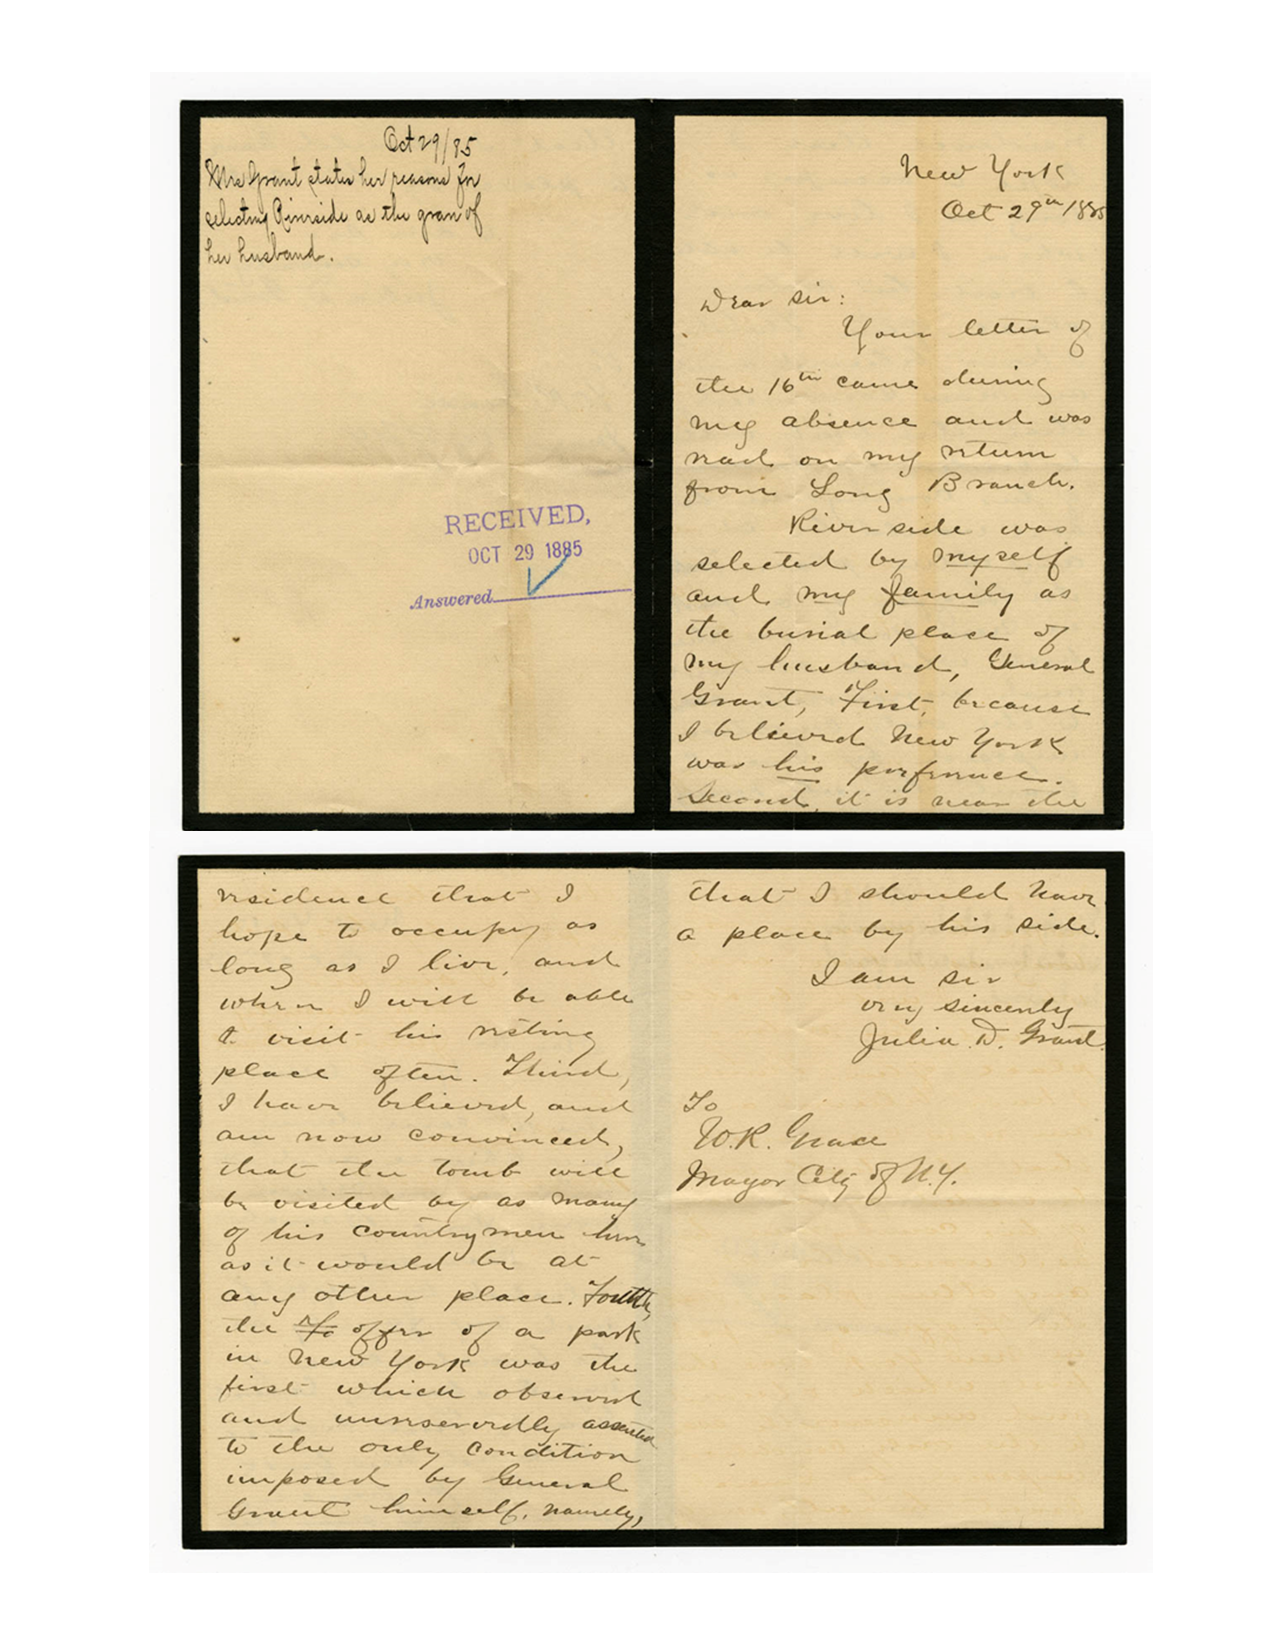 Two images of the beginning of Julia's letter to Mayor Grace, and second image of the end of her letter, written on tan paper with black cursive handwriting